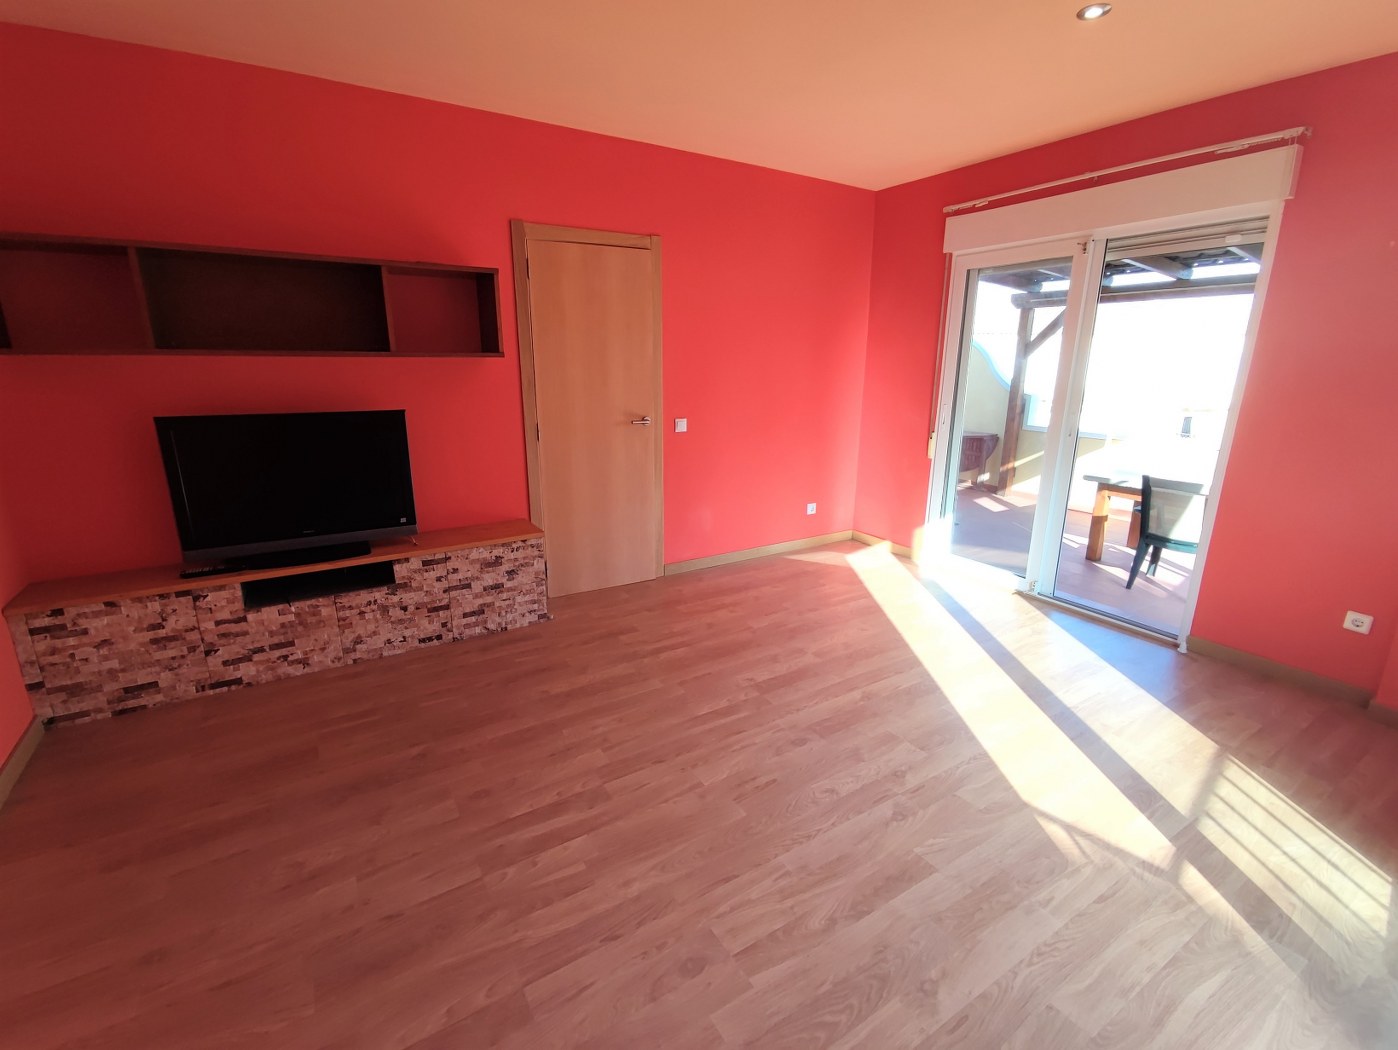 Apartment with 3 bedrooms, Pool, Els Poblets